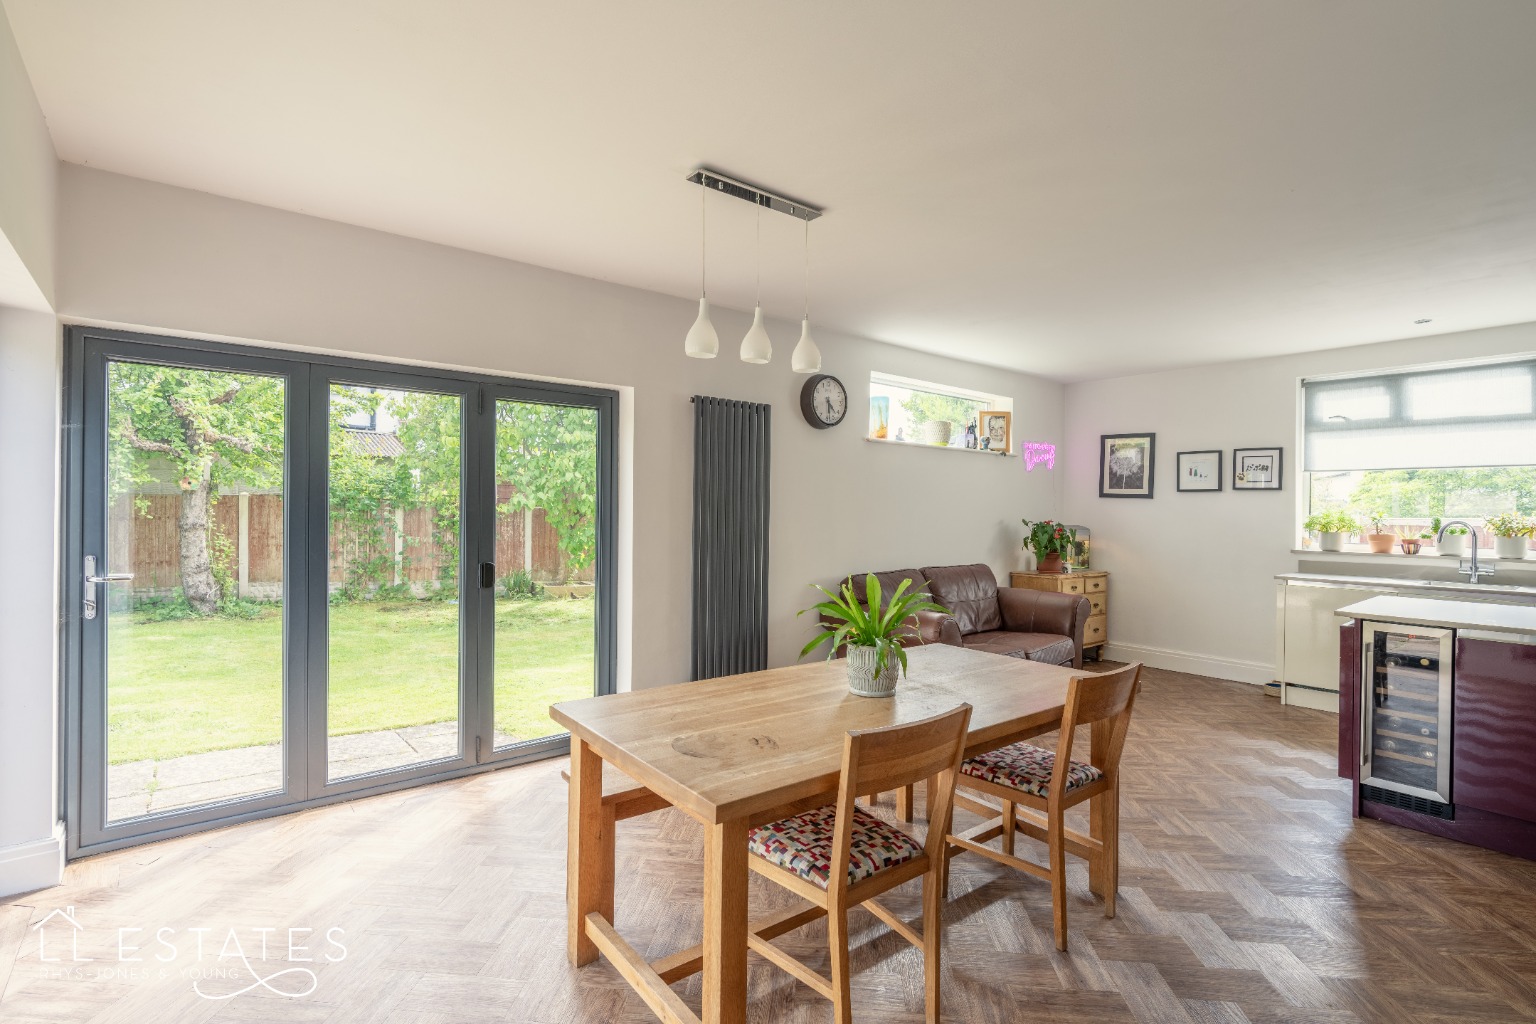 4 bed detached house for sale in Coed Mor Drive  - Property Image 3